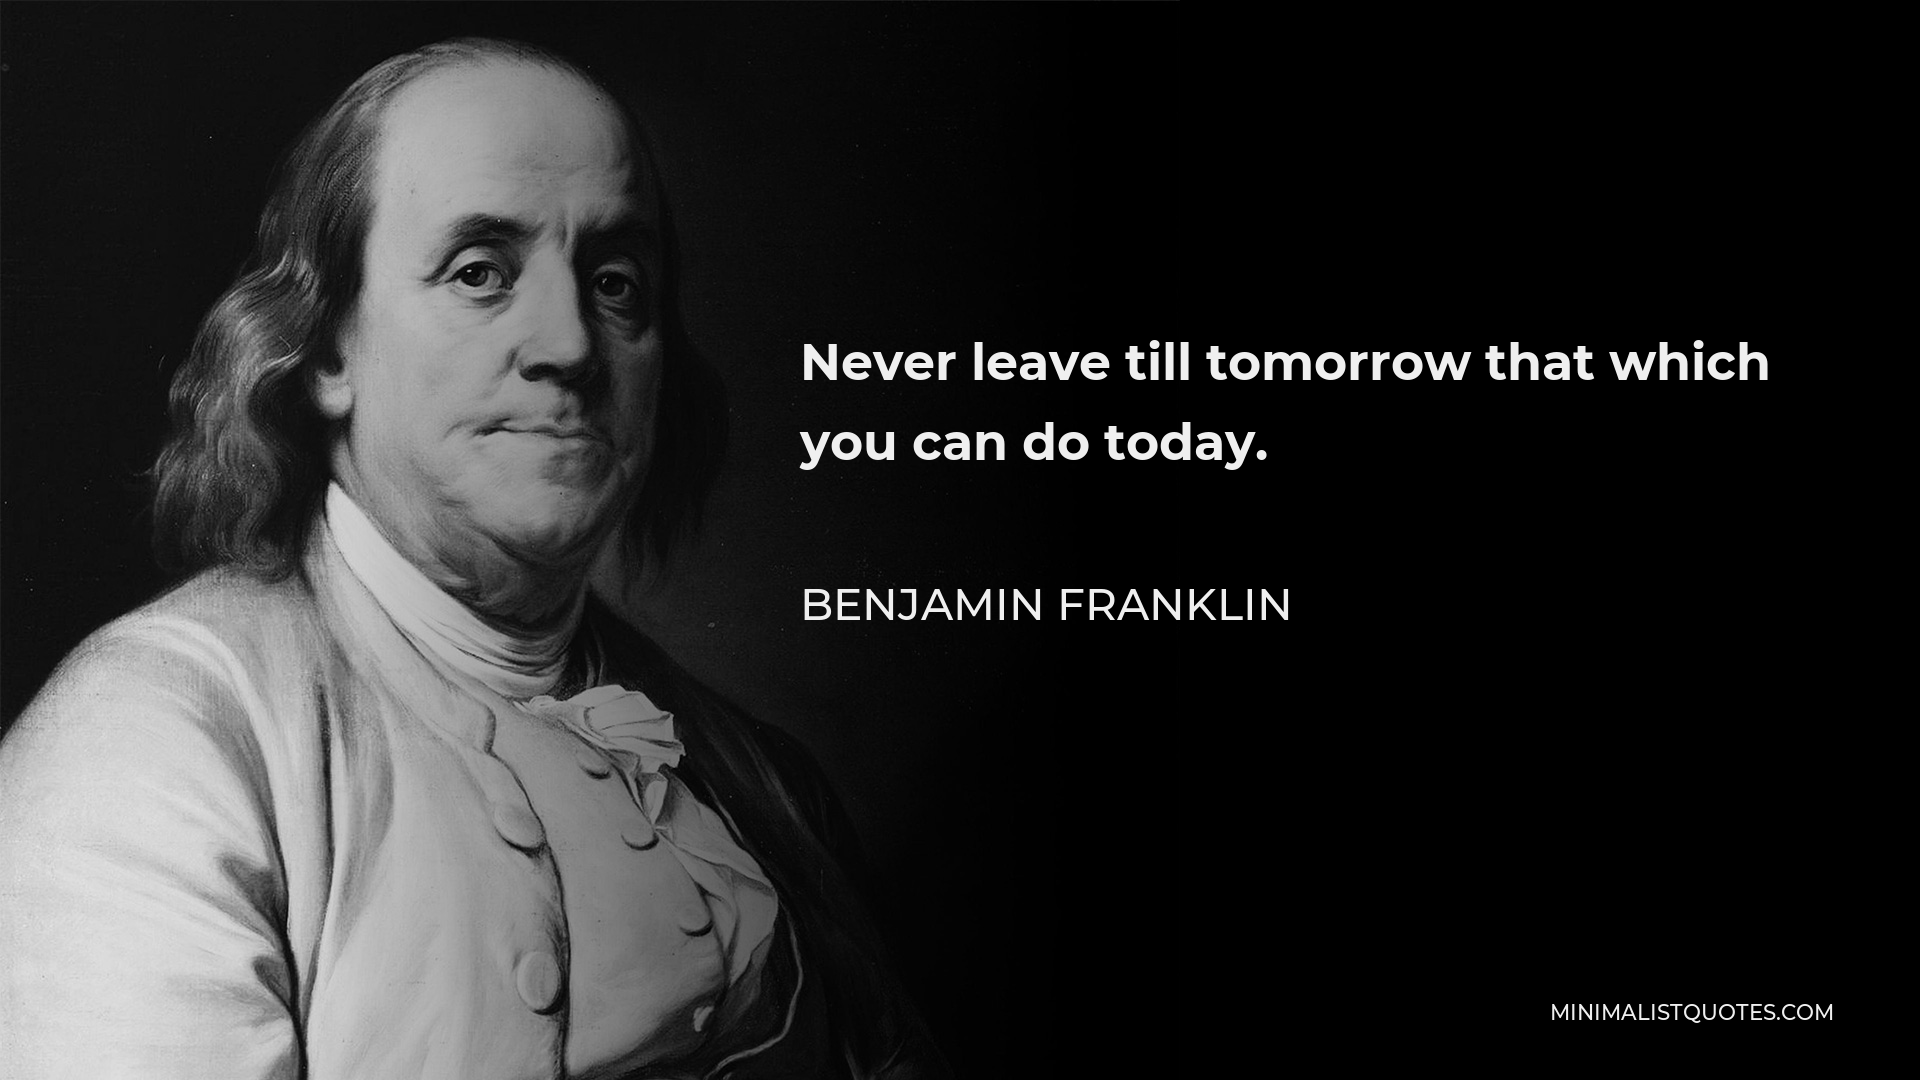 Benjamin Franklin Quote - Never leave till tomorrow that which you can do today.